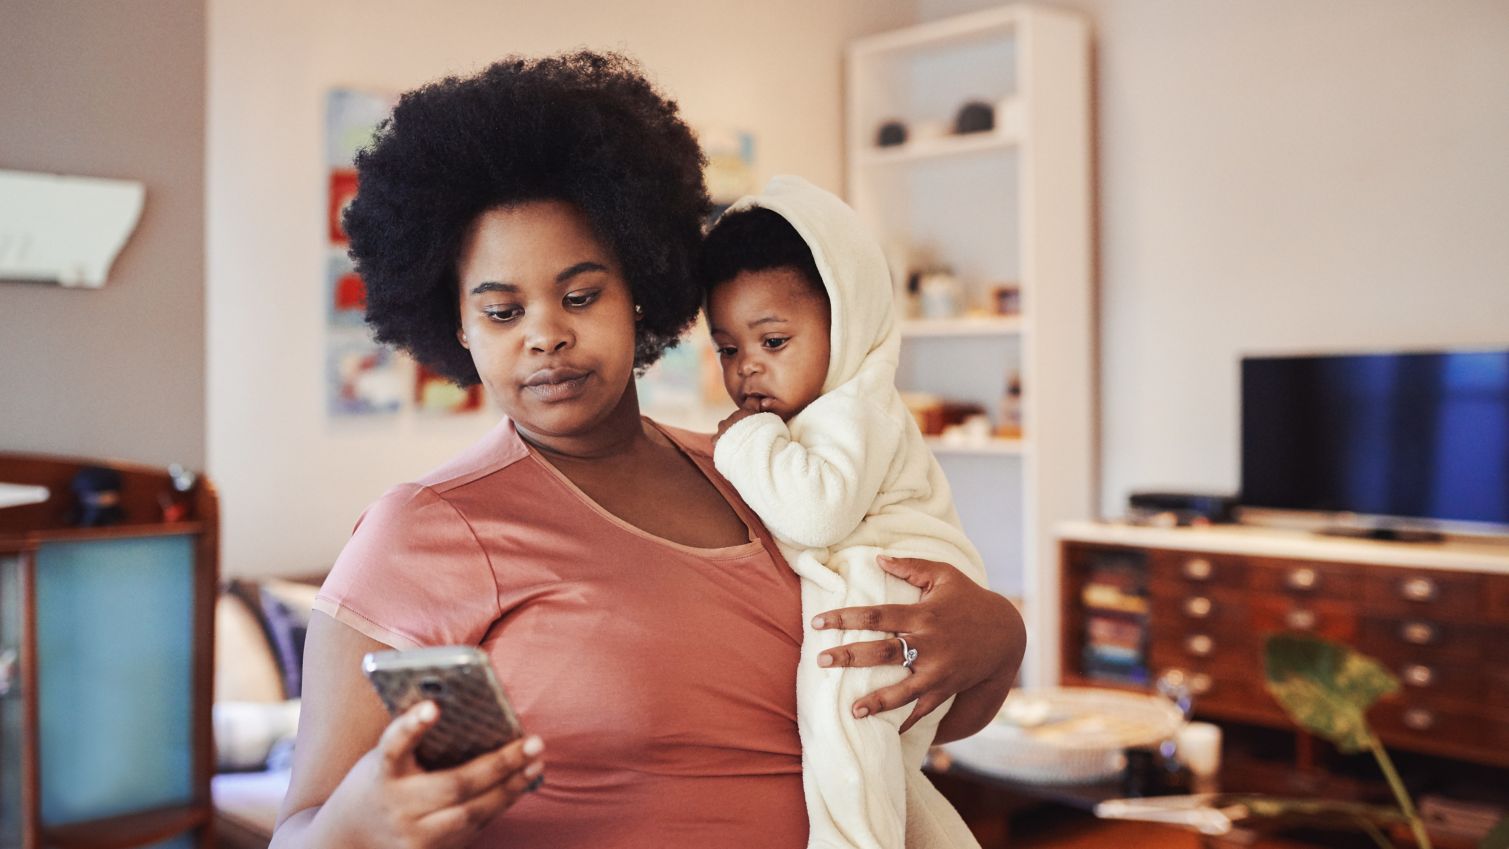 Mom holds infant while reading news on her cellphone